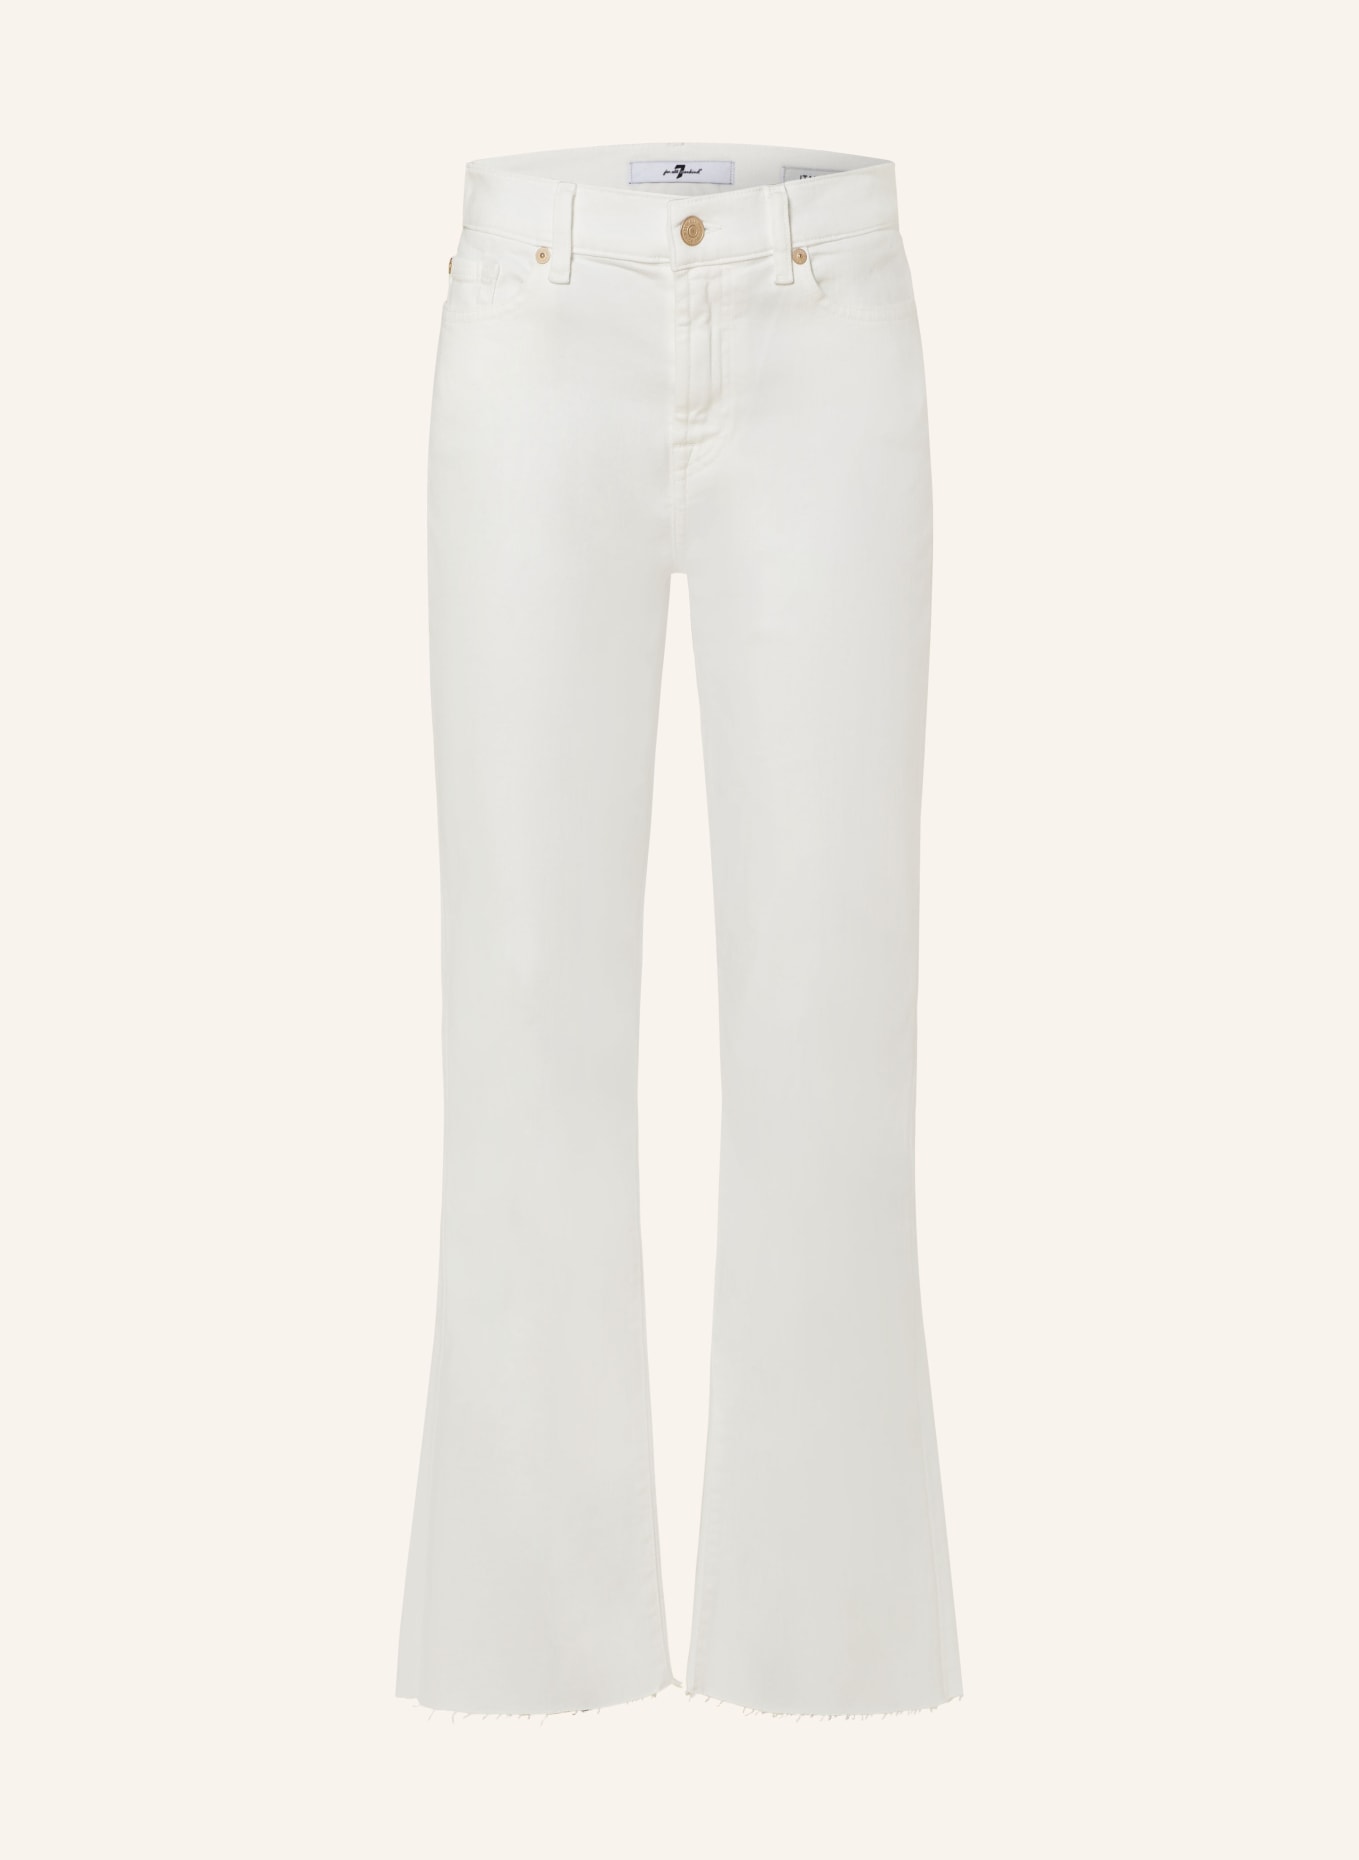 7 for all mankind 7/8-Jeans DAISY ANKLE BOOT, Farbe: WHITE (Bild 1)